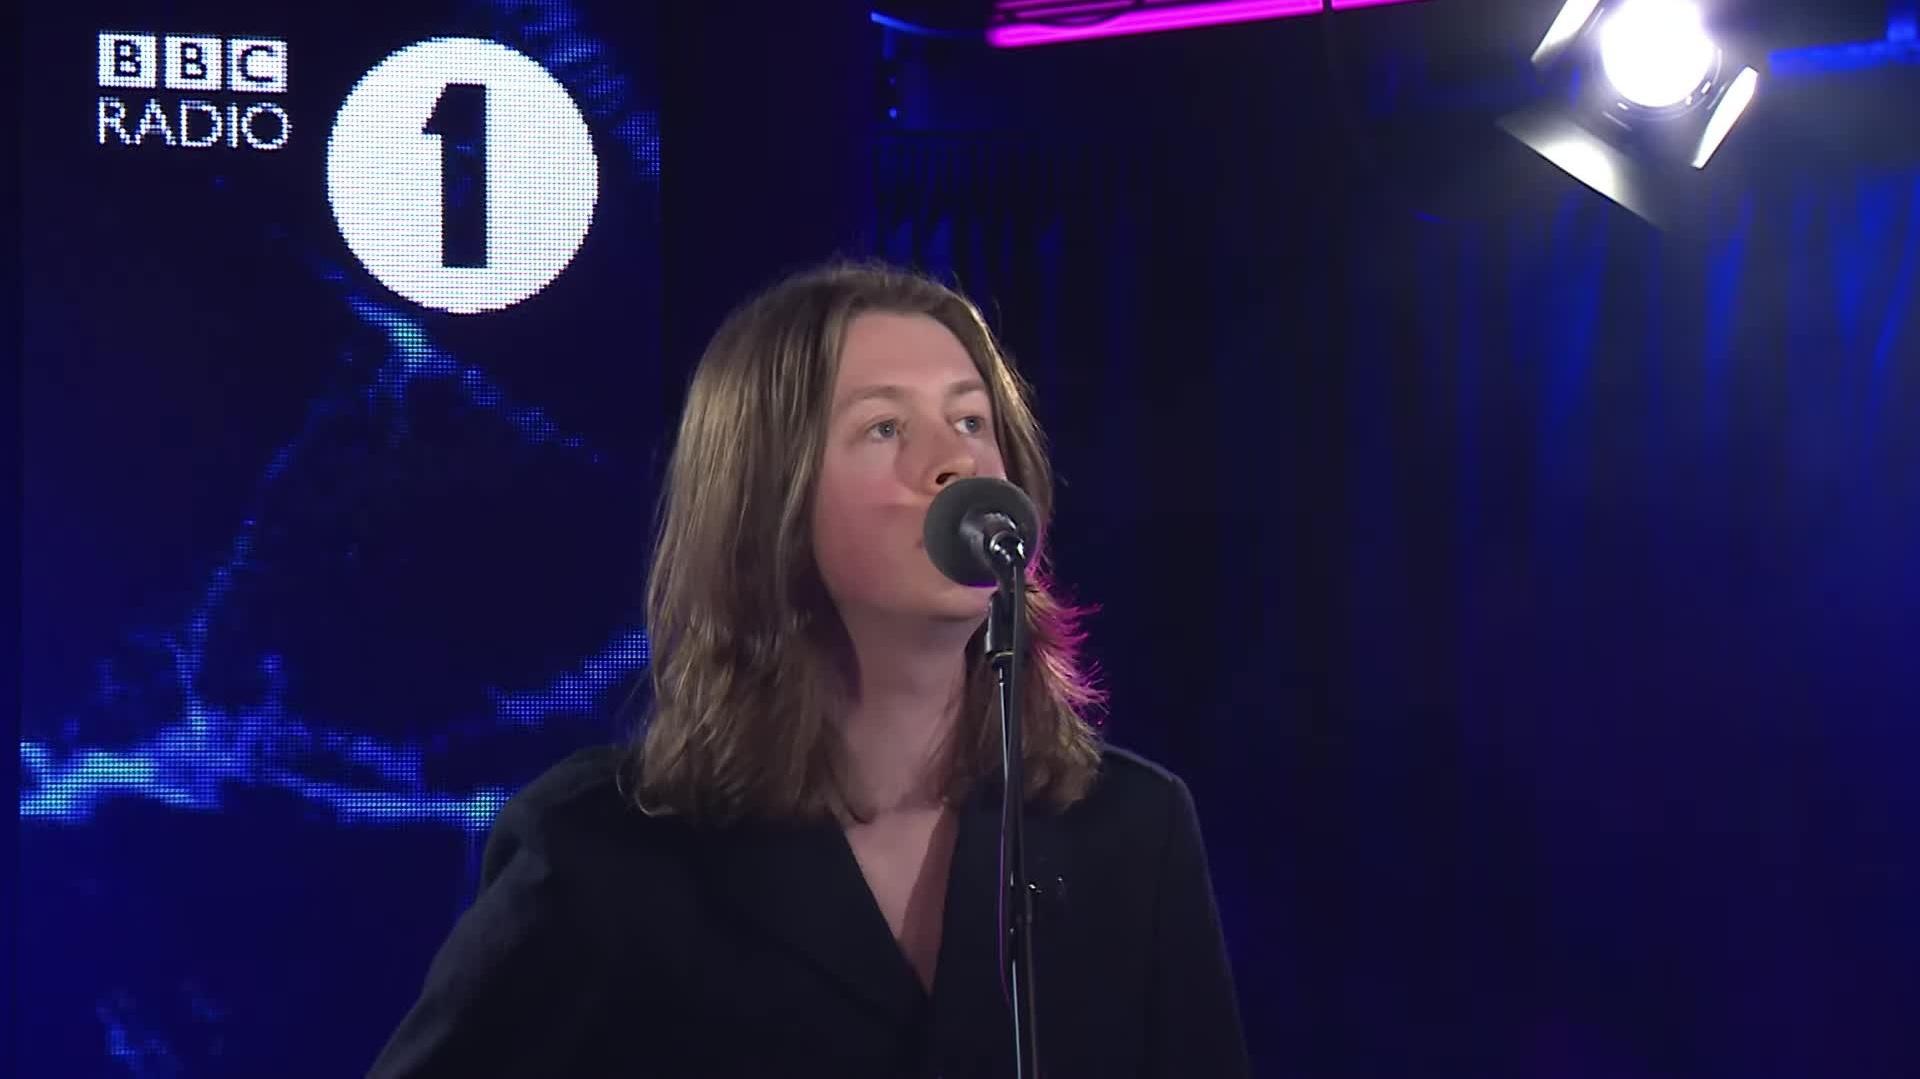 Blossoms - Adore You (Harry Styles cover) [Live at BBC Radio 1]